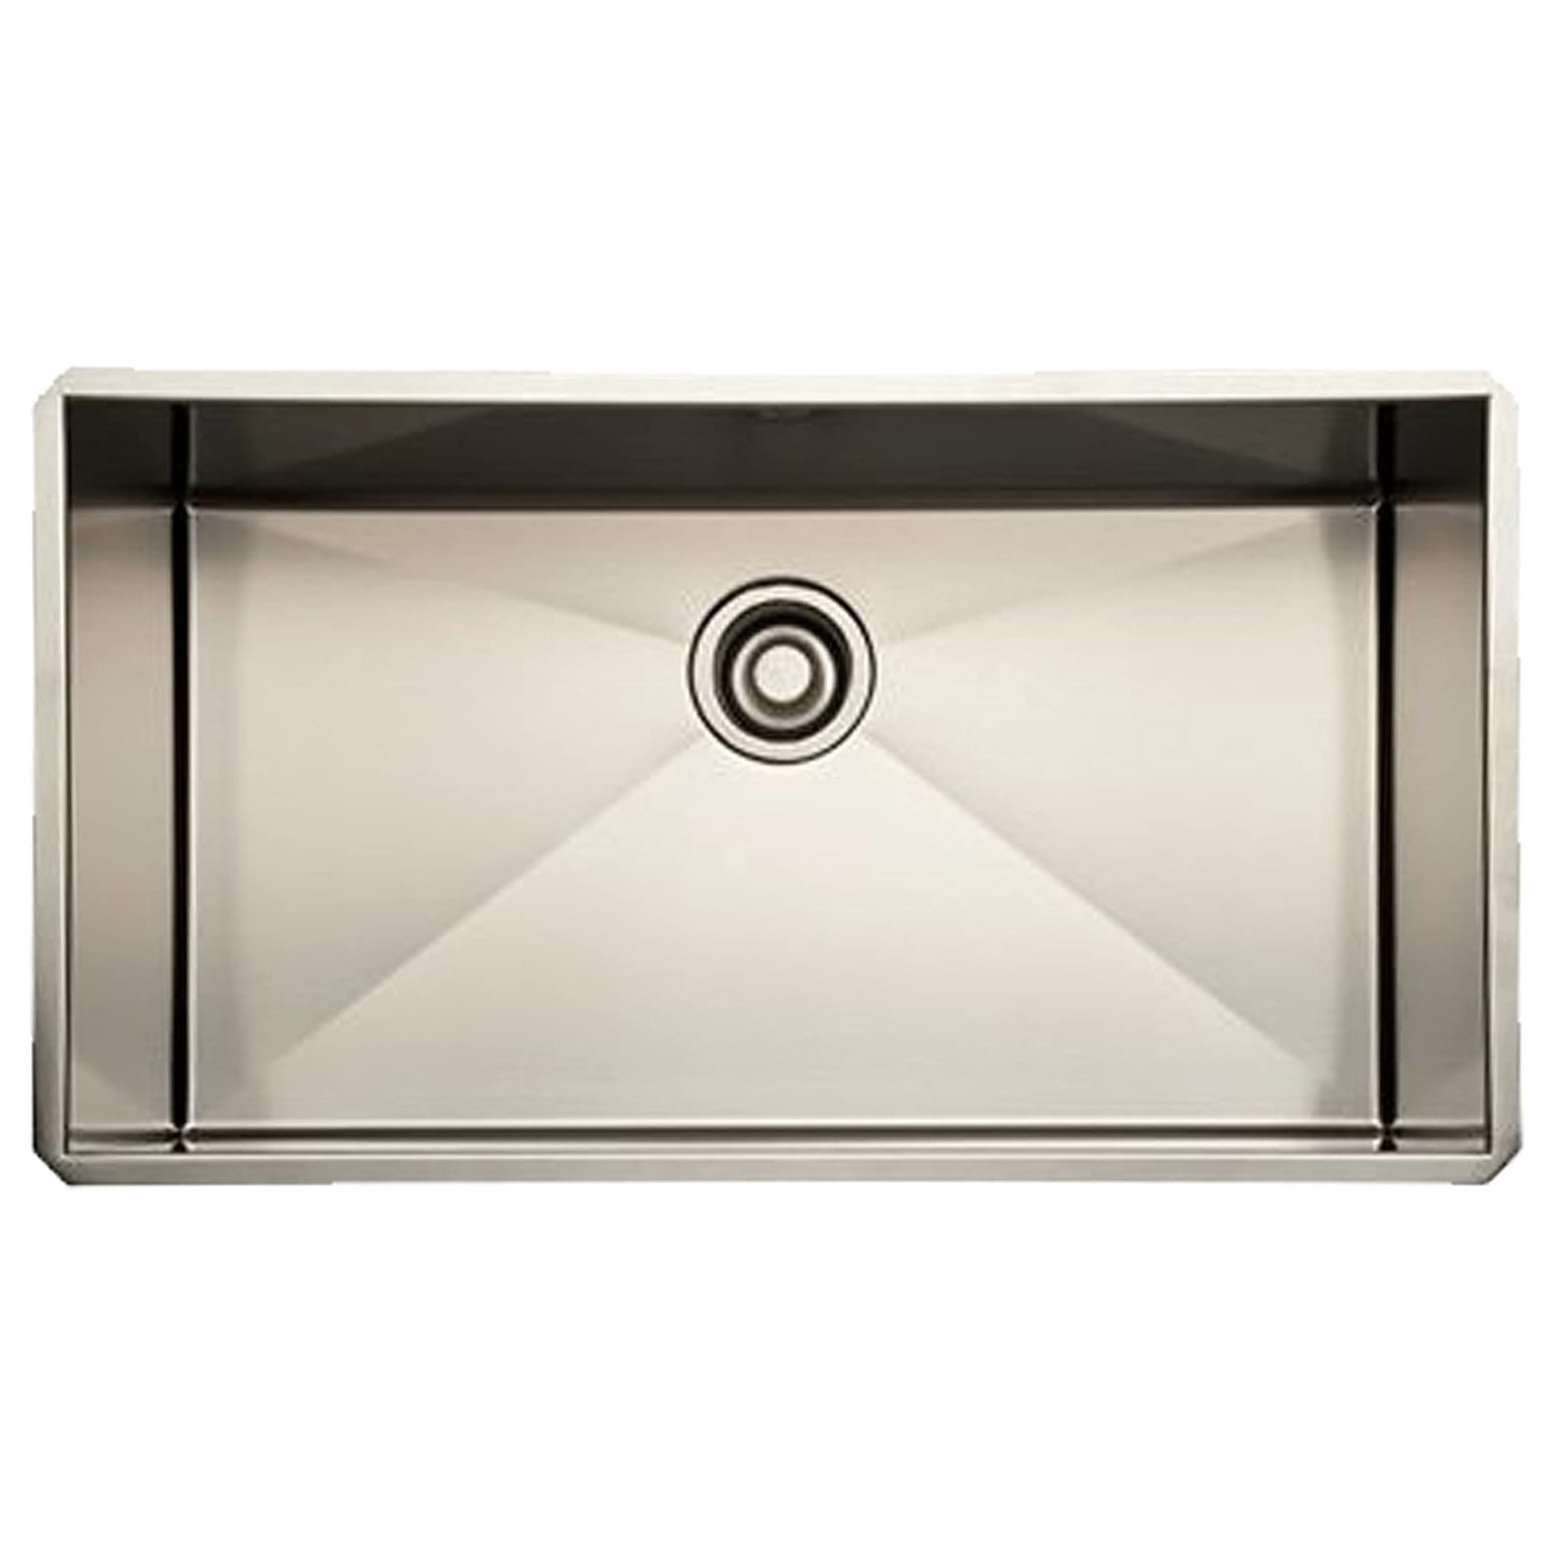 Forze 31-1/2x17-1/2x10" Kitchen Sink in Brushed Stainless